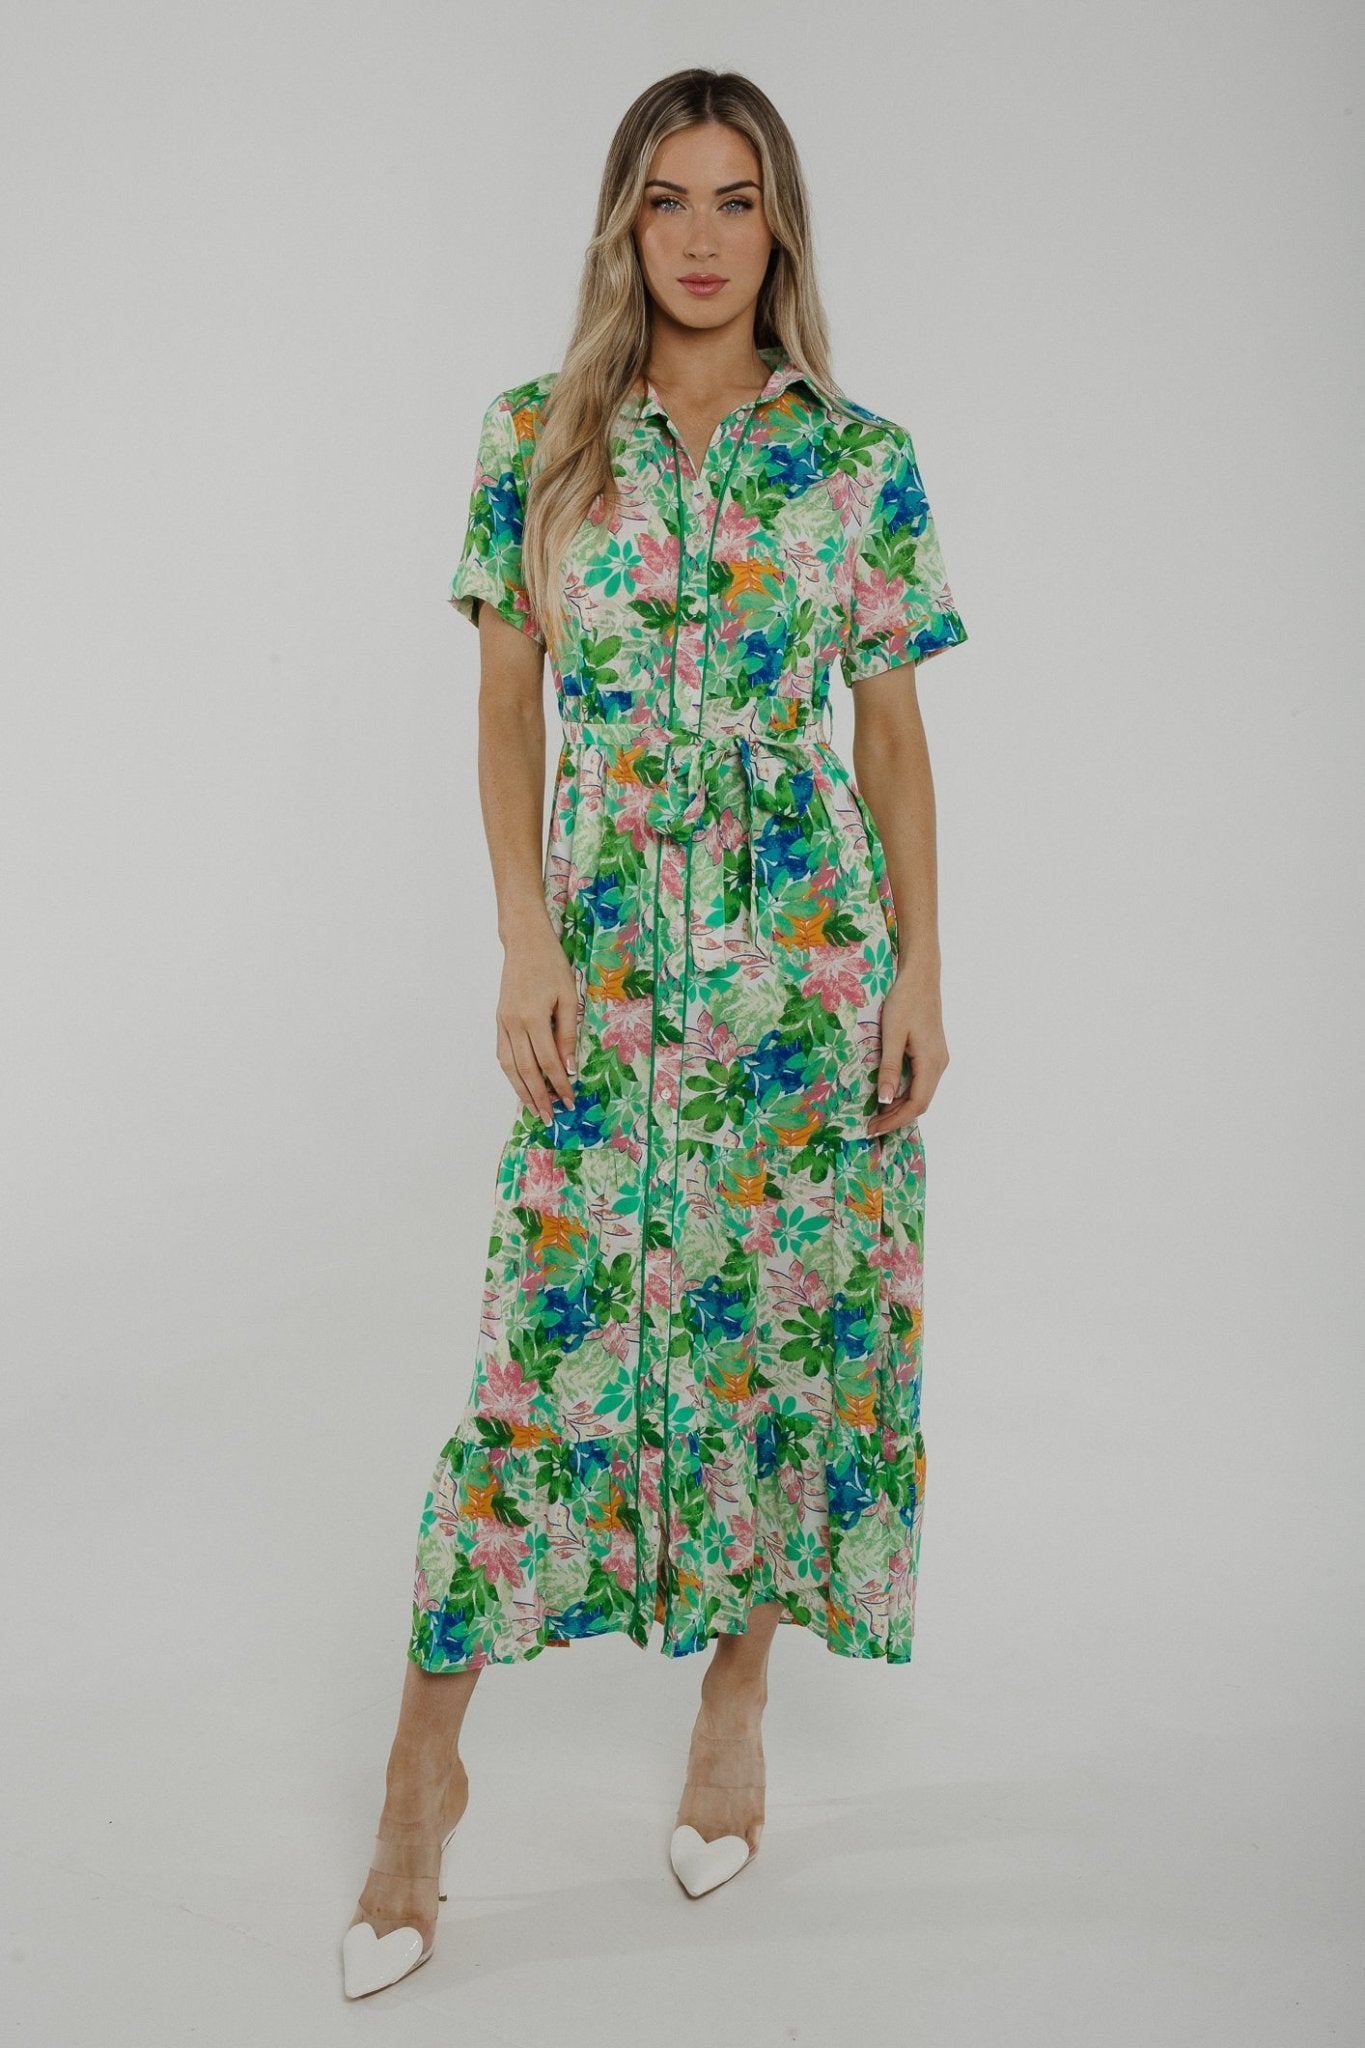 Polly Printed Shirt Dress In Green Floral - The Walk in Wardrobe